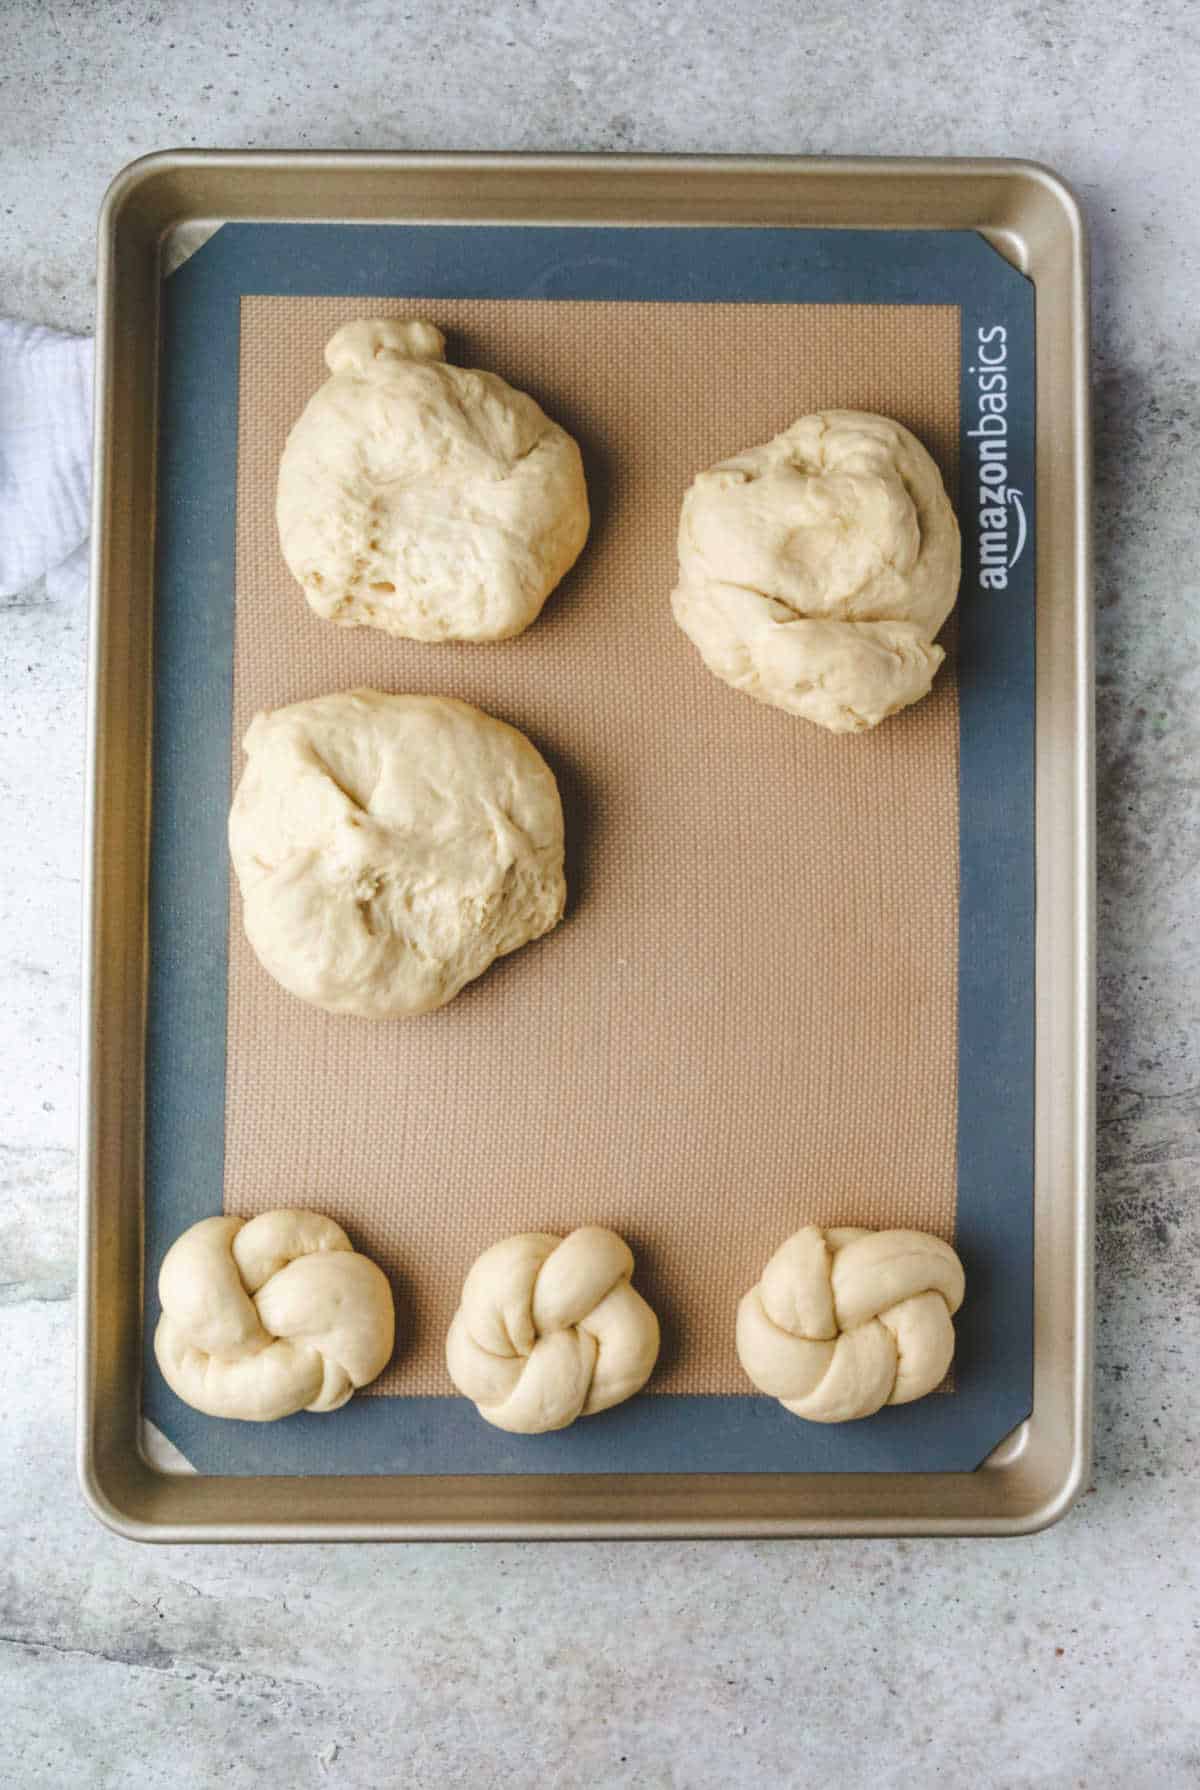 Pieces of dough being shaped into knots on a baking sheet. 